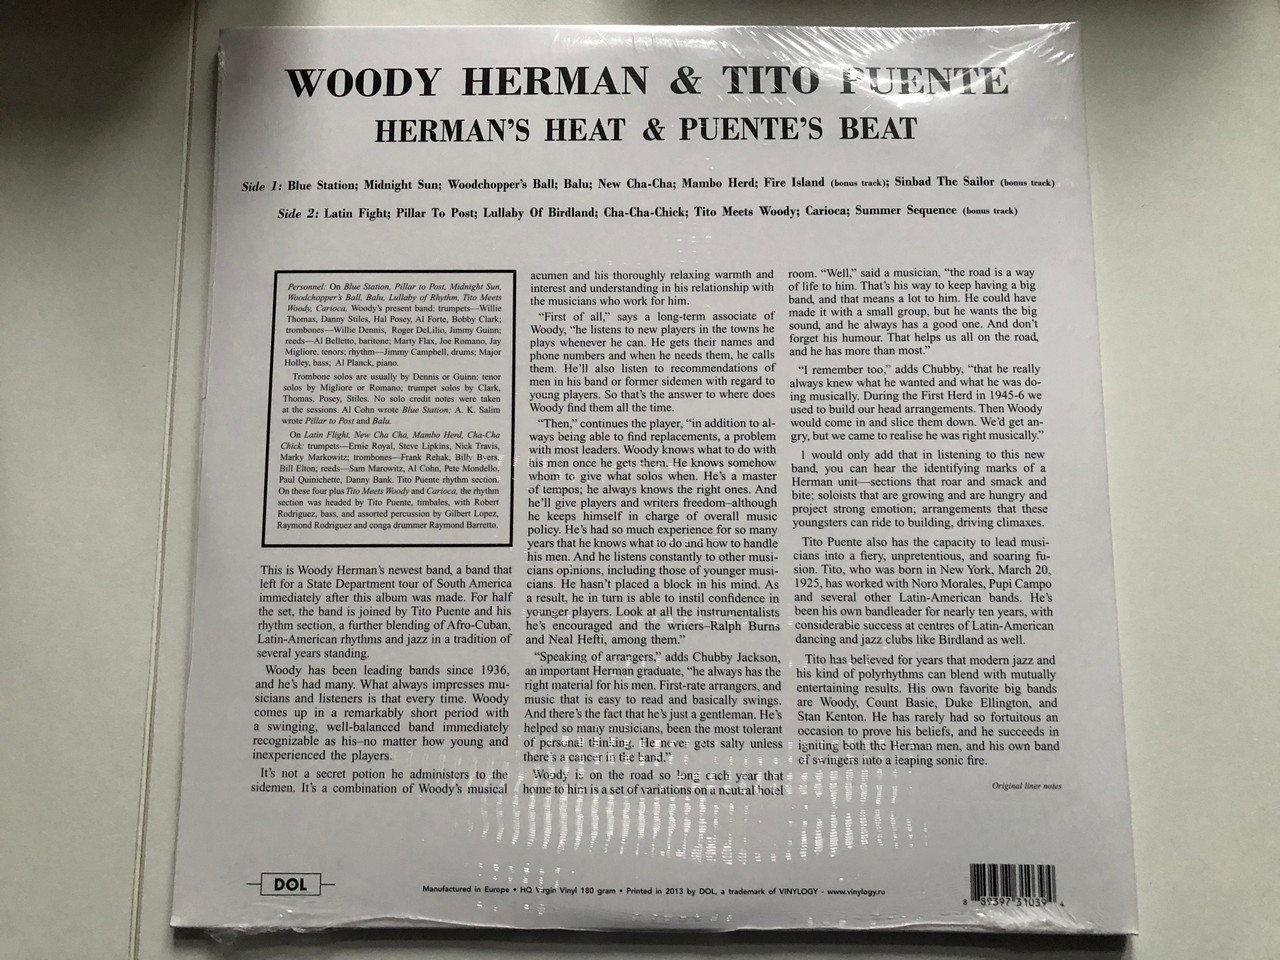 https://cdn10.bigcommerce.com/s-62bdpkt7pb/products/0/images/226527/Hermans_Heat_Puentes_Beat_Deluxe_Gatefold_Edition_180_Gram_HQ_Virgin_Vinyl_Tito_Puentes_Latin_Rhythms_And_Beats_Meshed_With_The_Swing_And_Bebop_Of_Hermans_Band._The_Results_Are_Hot__43838.1651656373.1280.1280.JPG?c=2&_gl=1*4y5d49*_ga*MjA2NTIxMjE2MC4xNTkwNTEyNTMy*_ga_WS2VZYPC6G*MTY1MTY1NjA1Ni4zODIuMS4xNjUxNjU2MTM2LjUx